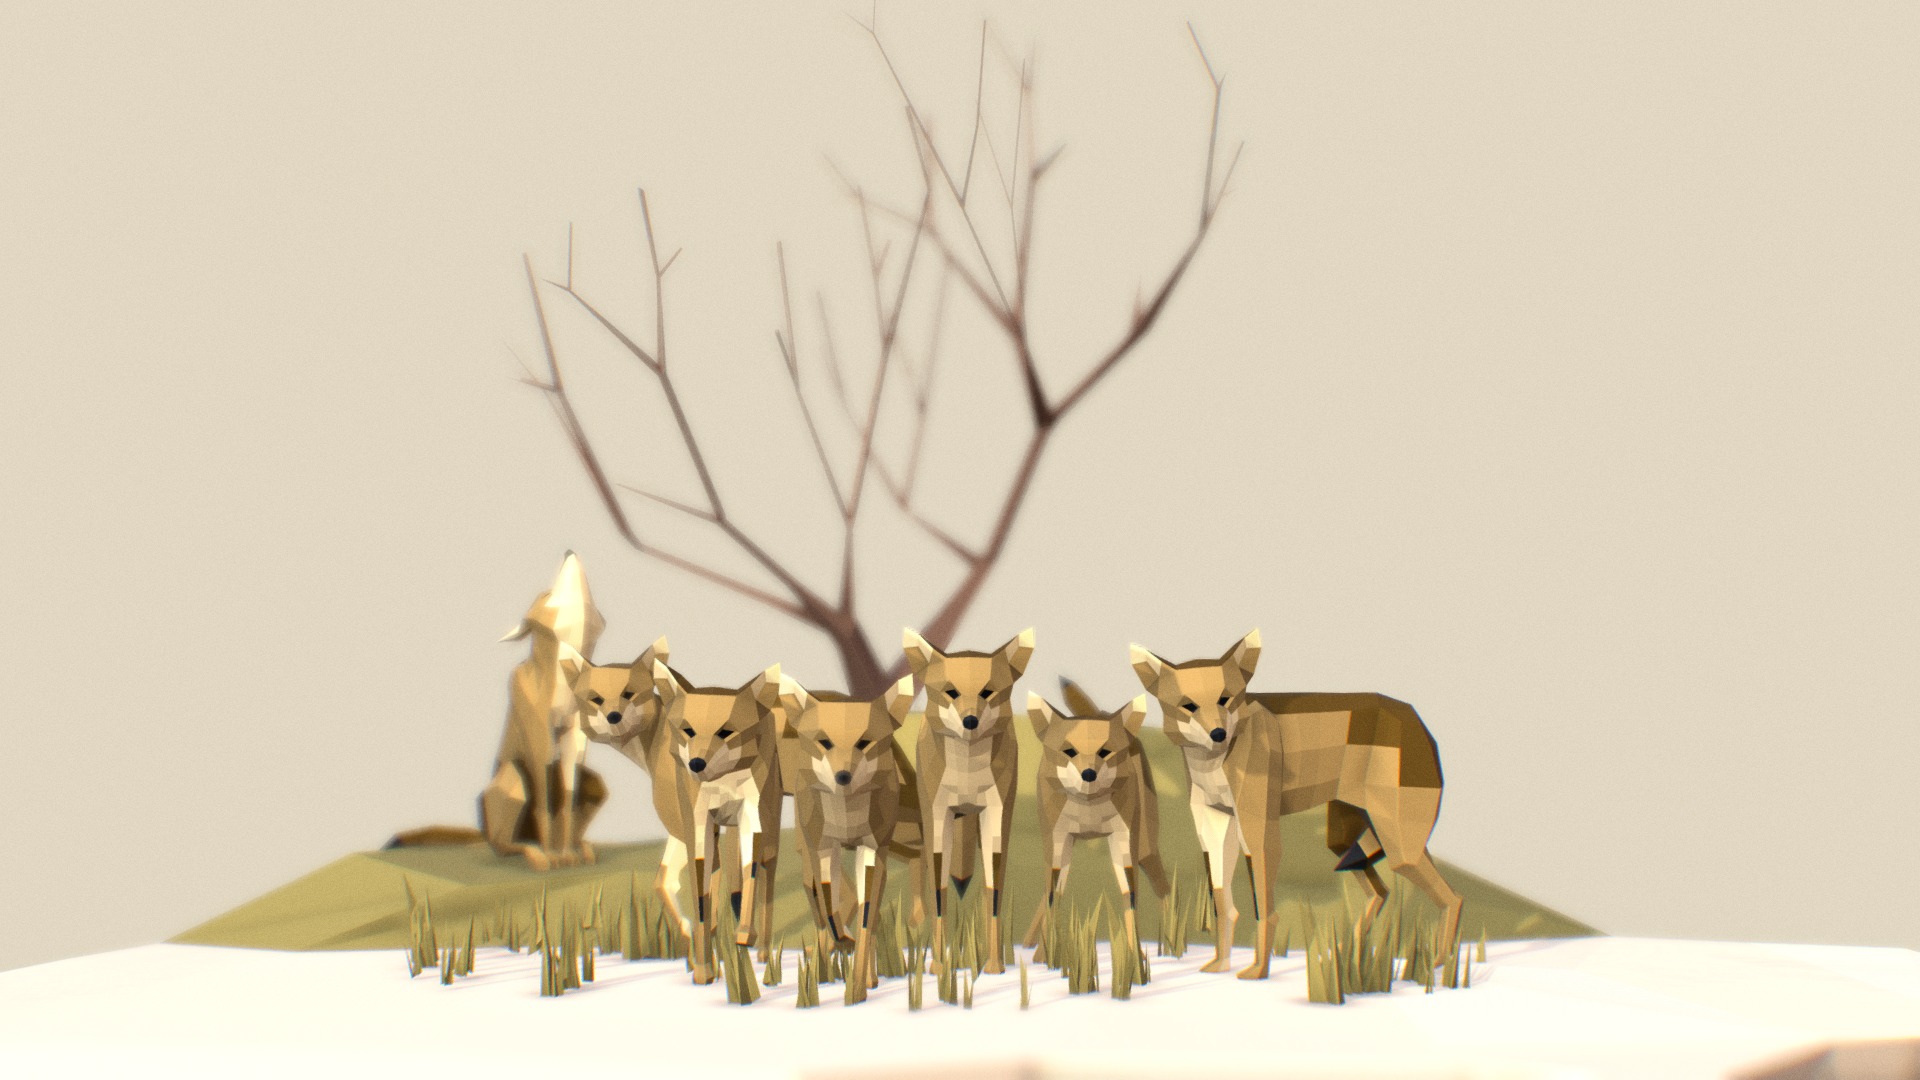 3D model Coyotes - This is a 3D model of the Coyotes. The 3D model is about a group of dogs in clothing.